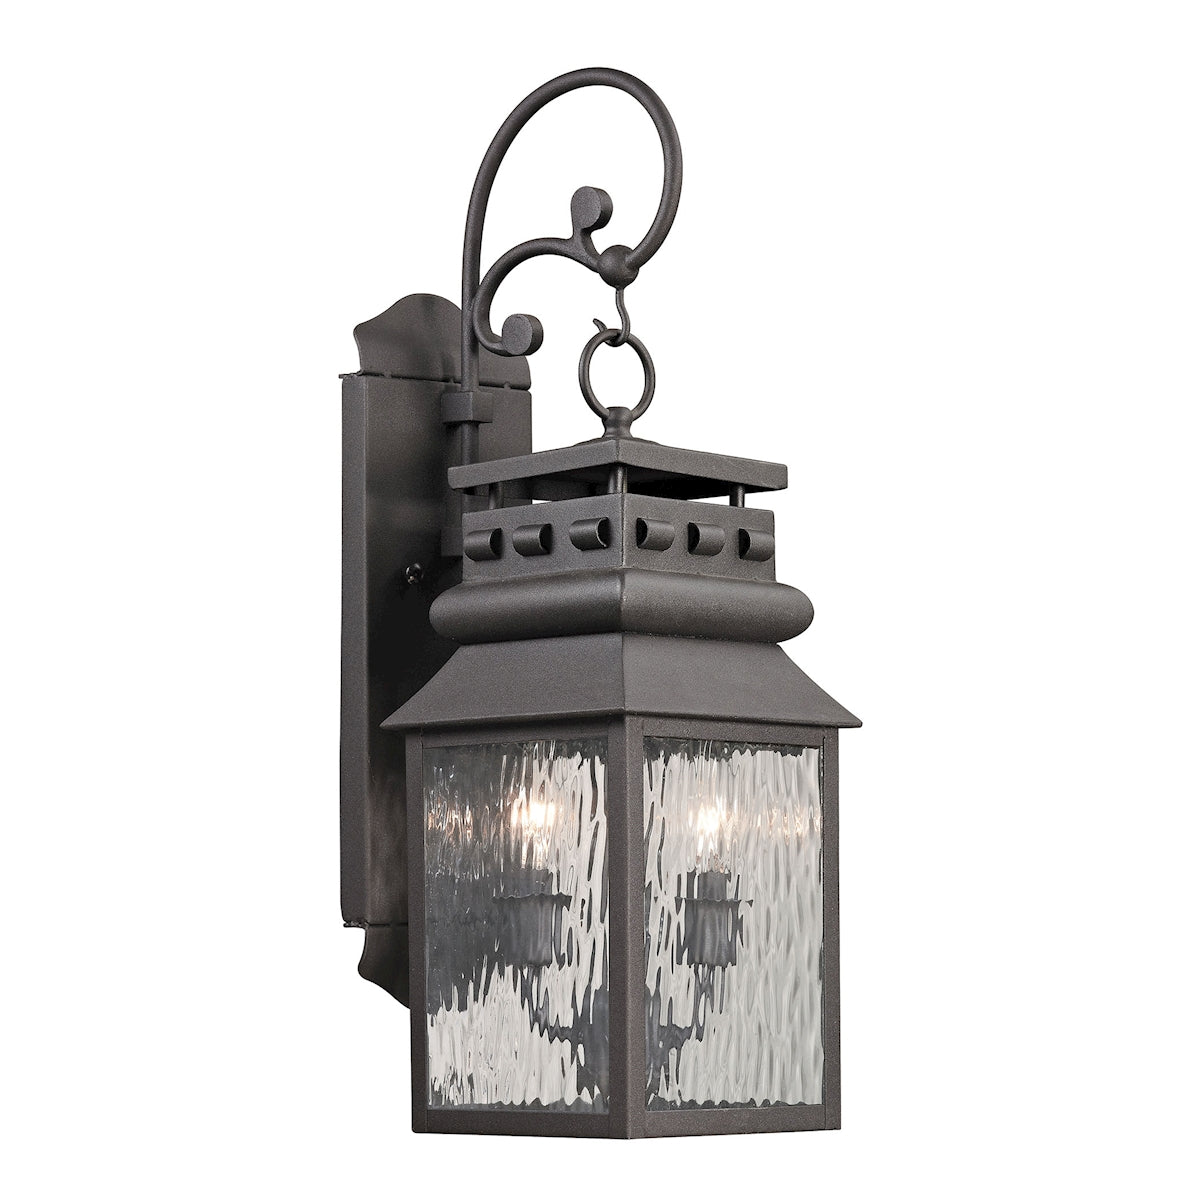 ELK Lighting 47065/2 Forged Lancaster 2-Light Outdoor Wall Lamp in Charcoal